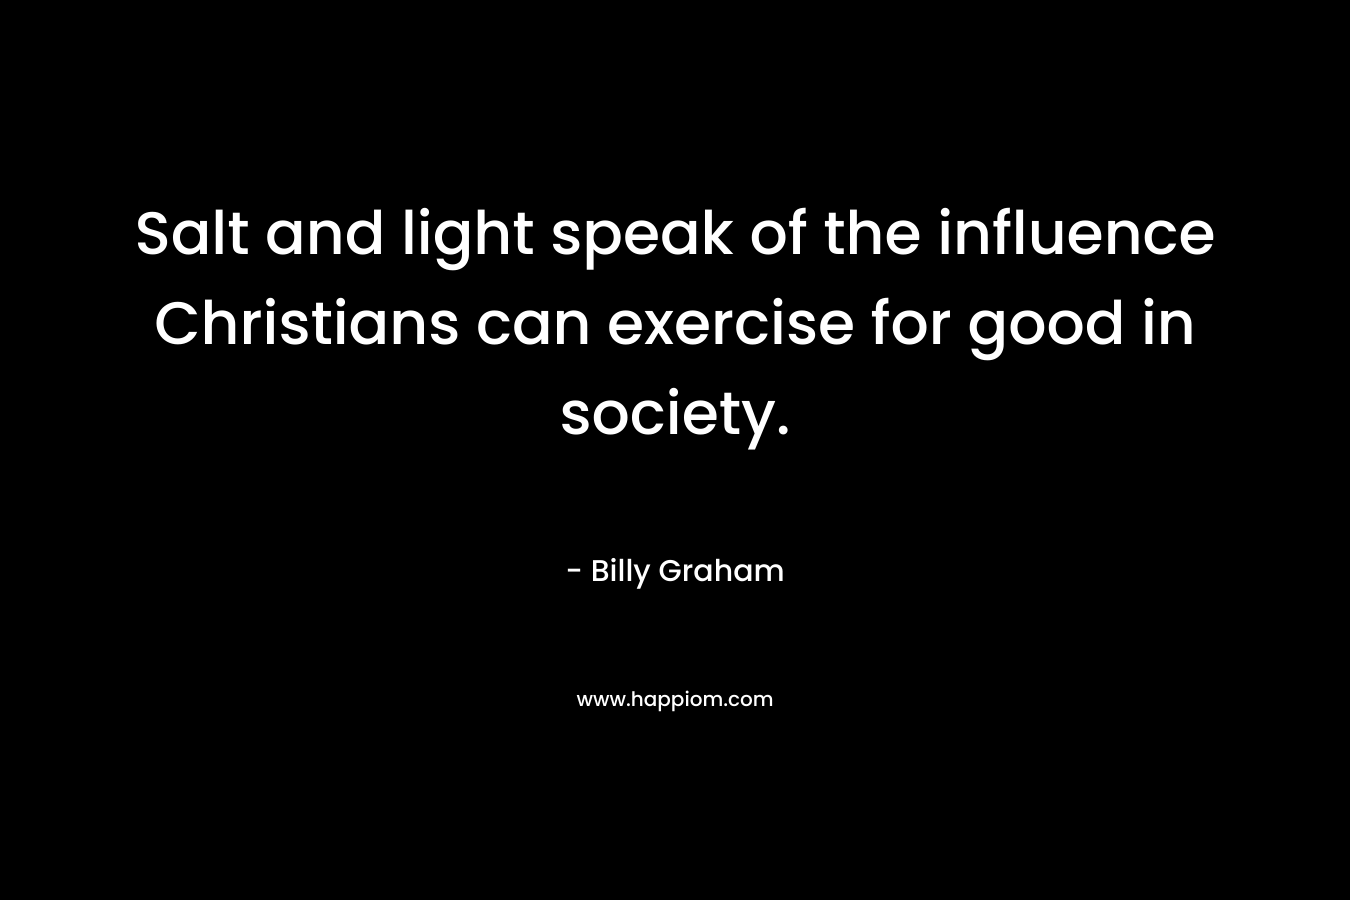 Salt and light speak of the influence Christians can exercise for good in society.